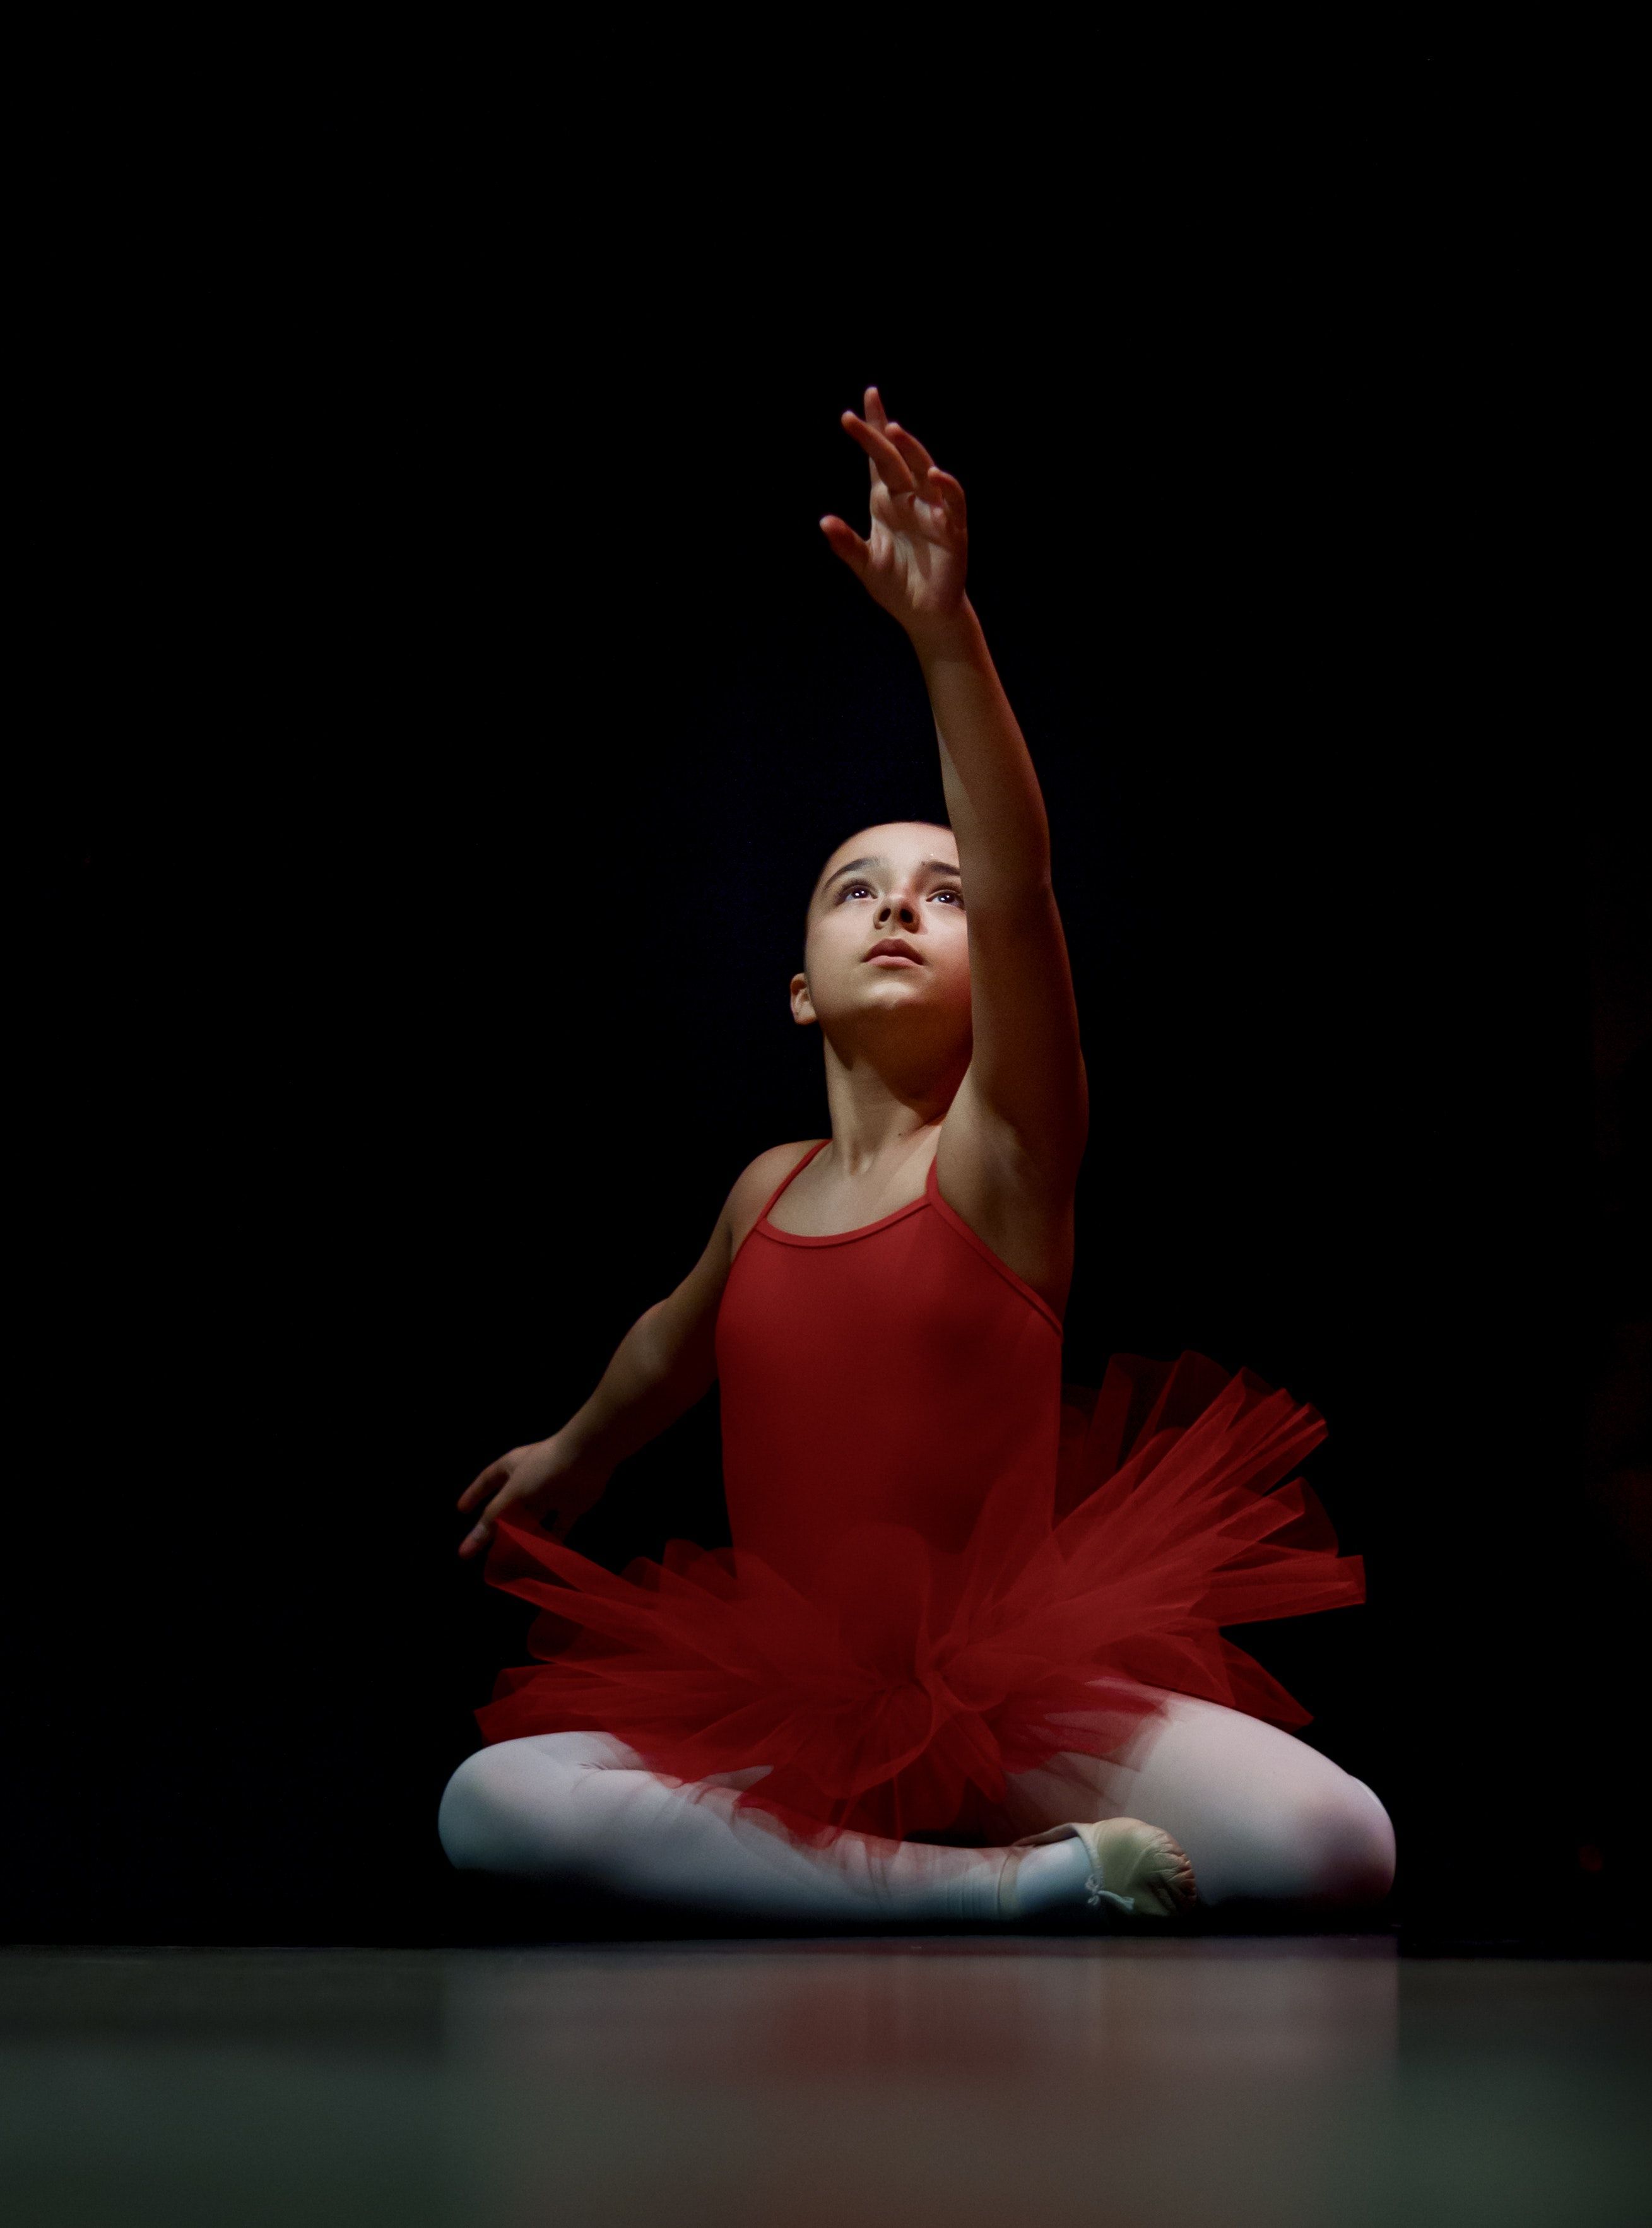 A young ballerina in a red tutu sitting on the floor - Dance, ballet